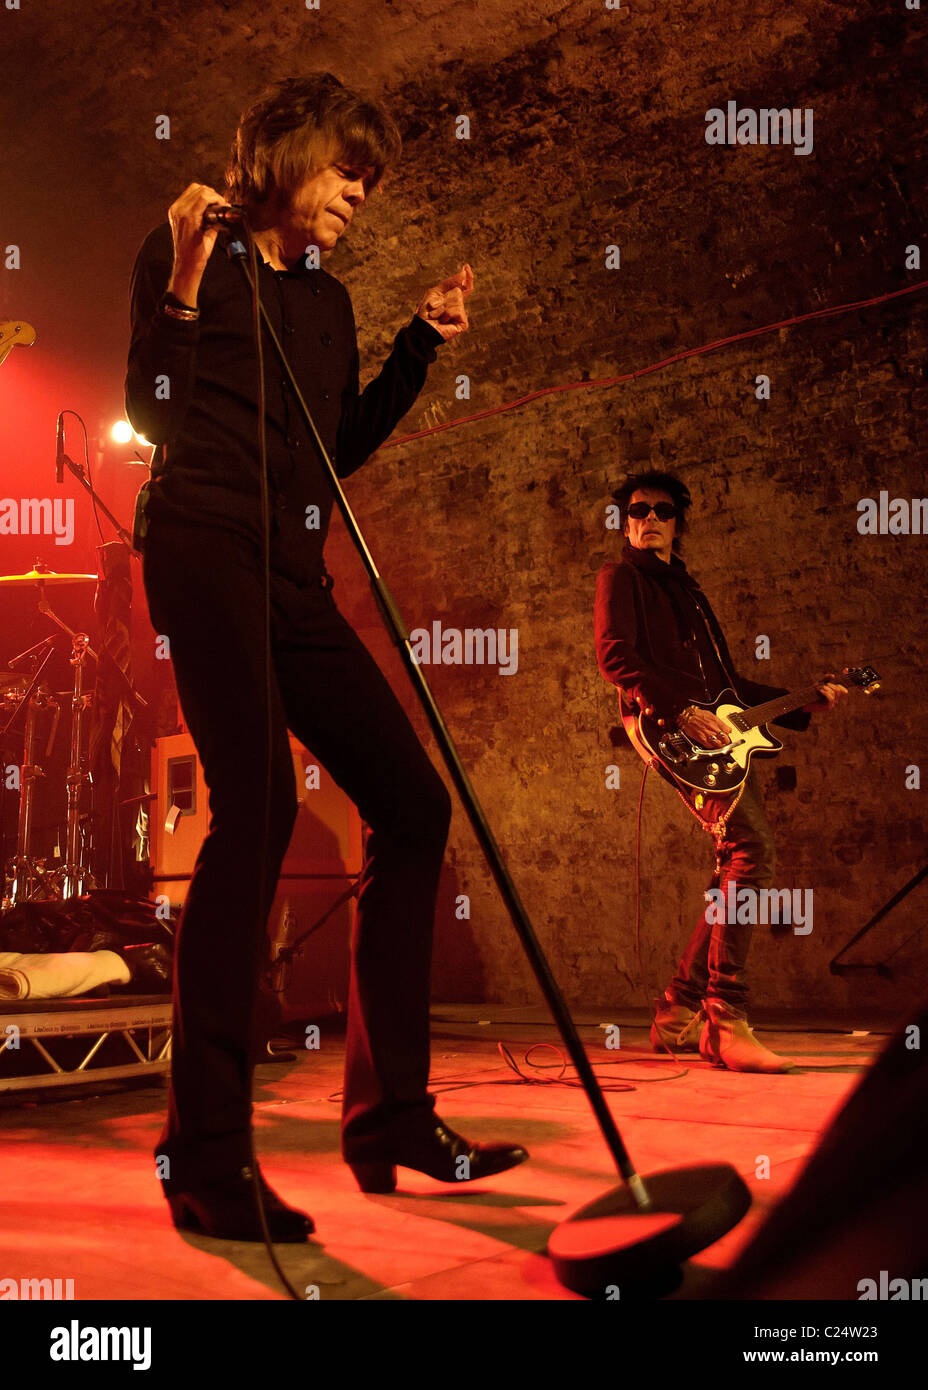 The New York Dolls play an intimate gig at the Old Vic Tunnels under Waterloo Station, London on 31st March 2011. Stock Photo